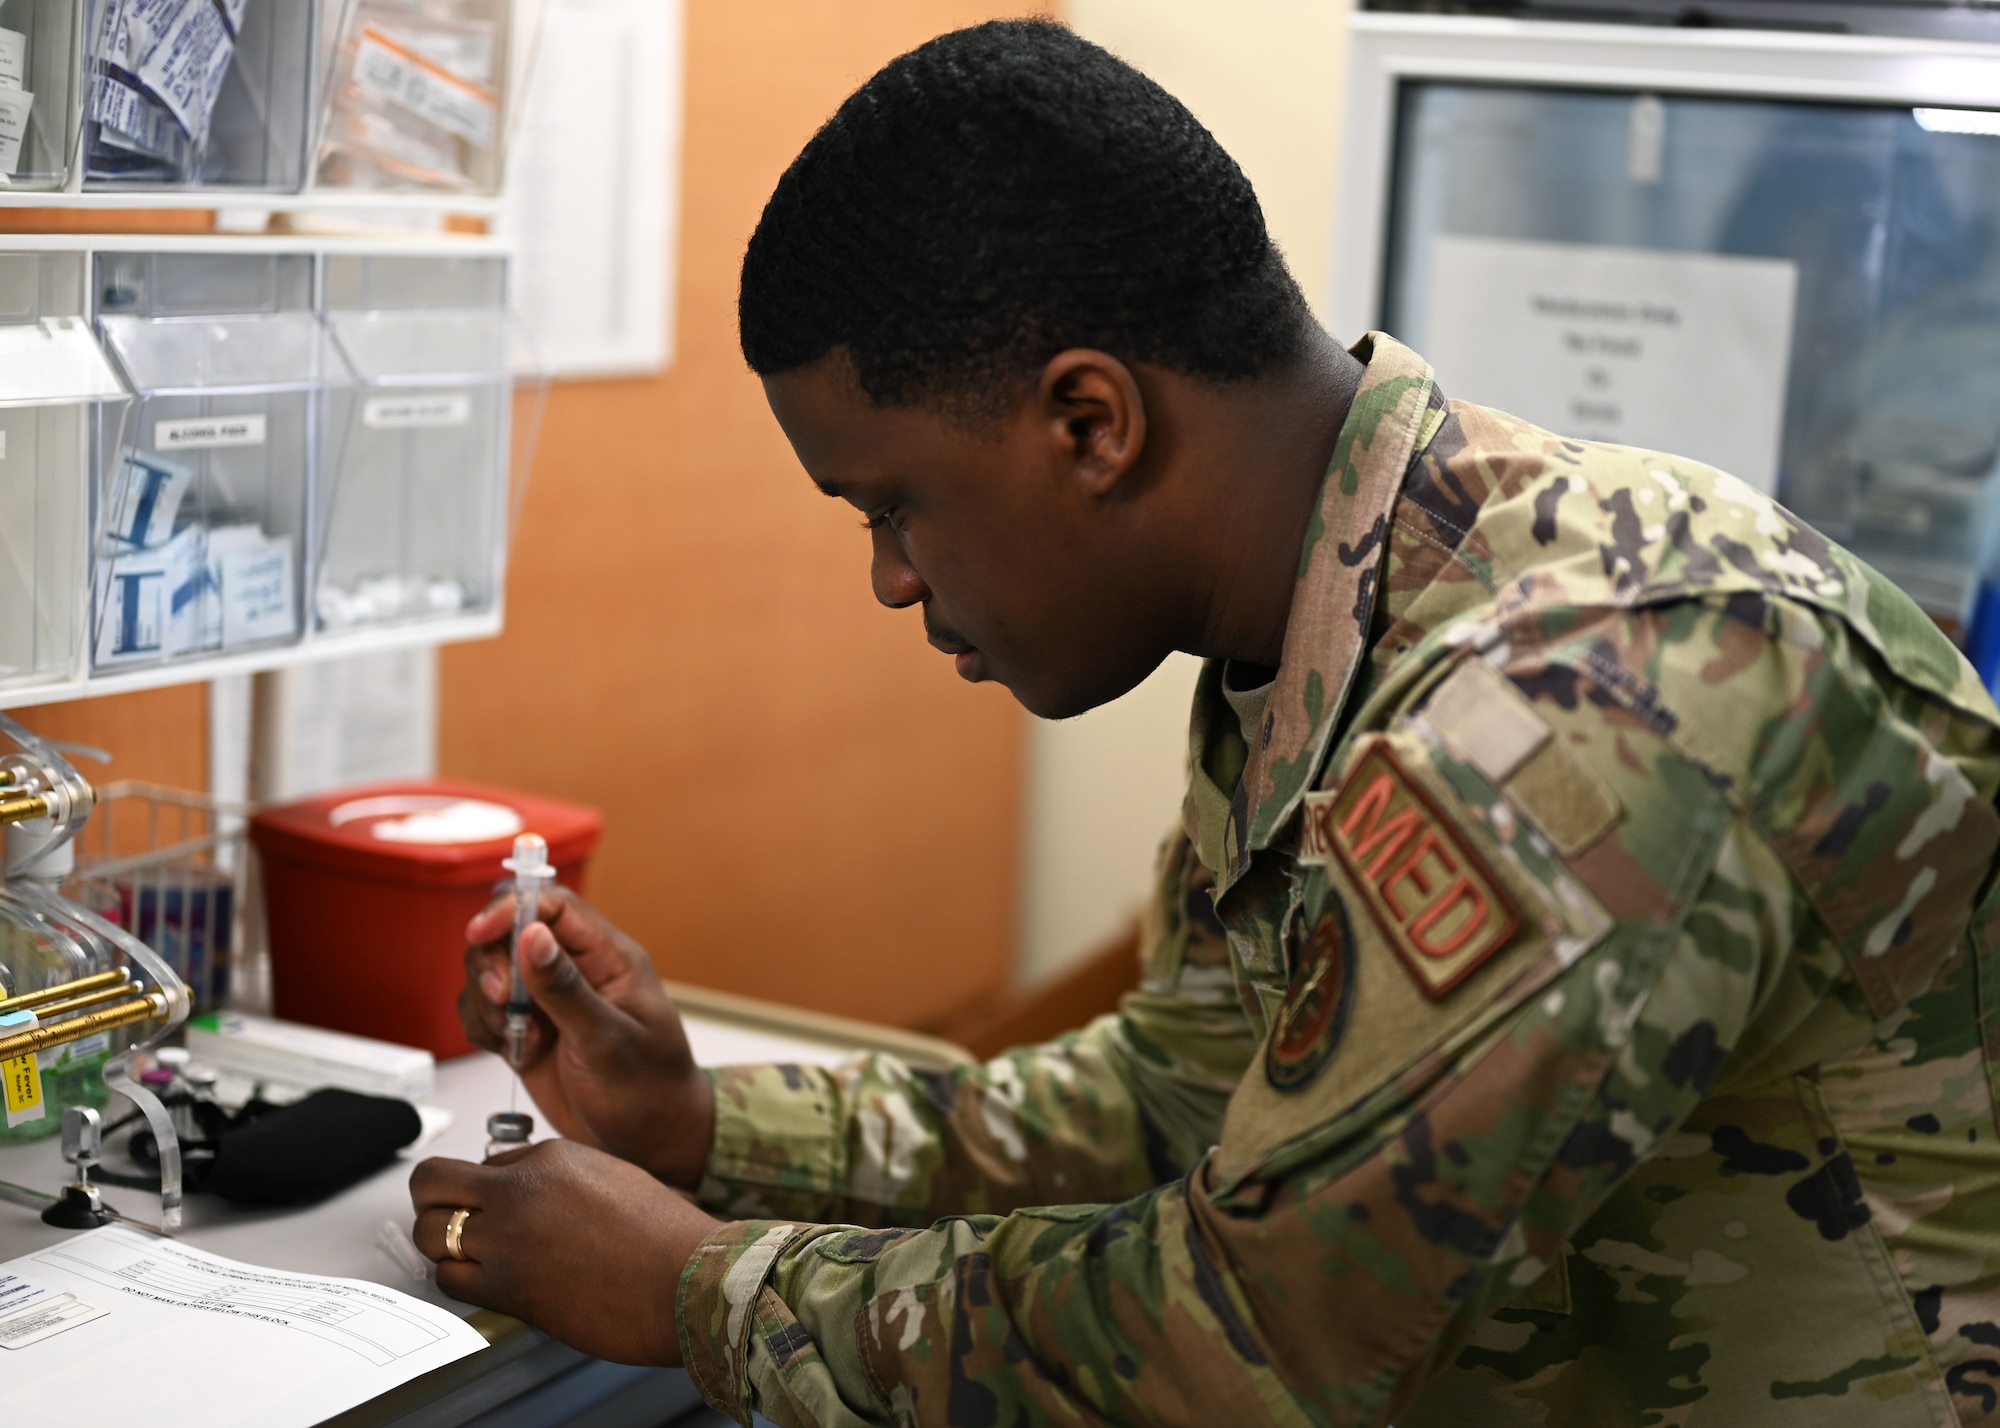 U.S. Air Force Senior Airman Micah Savage, 17th Medical Group immunizations technician, demonstrates how vaccines are prepared at the Ross Clinic on Goodfellow Air Force Base Texas, April 19, 2021. Savage performed his duties as an immunization technician to ensure the health and welfare of all Goodfellow personnel. (U.S. Air Force photo by Airman 1st Class Michael Bowman)